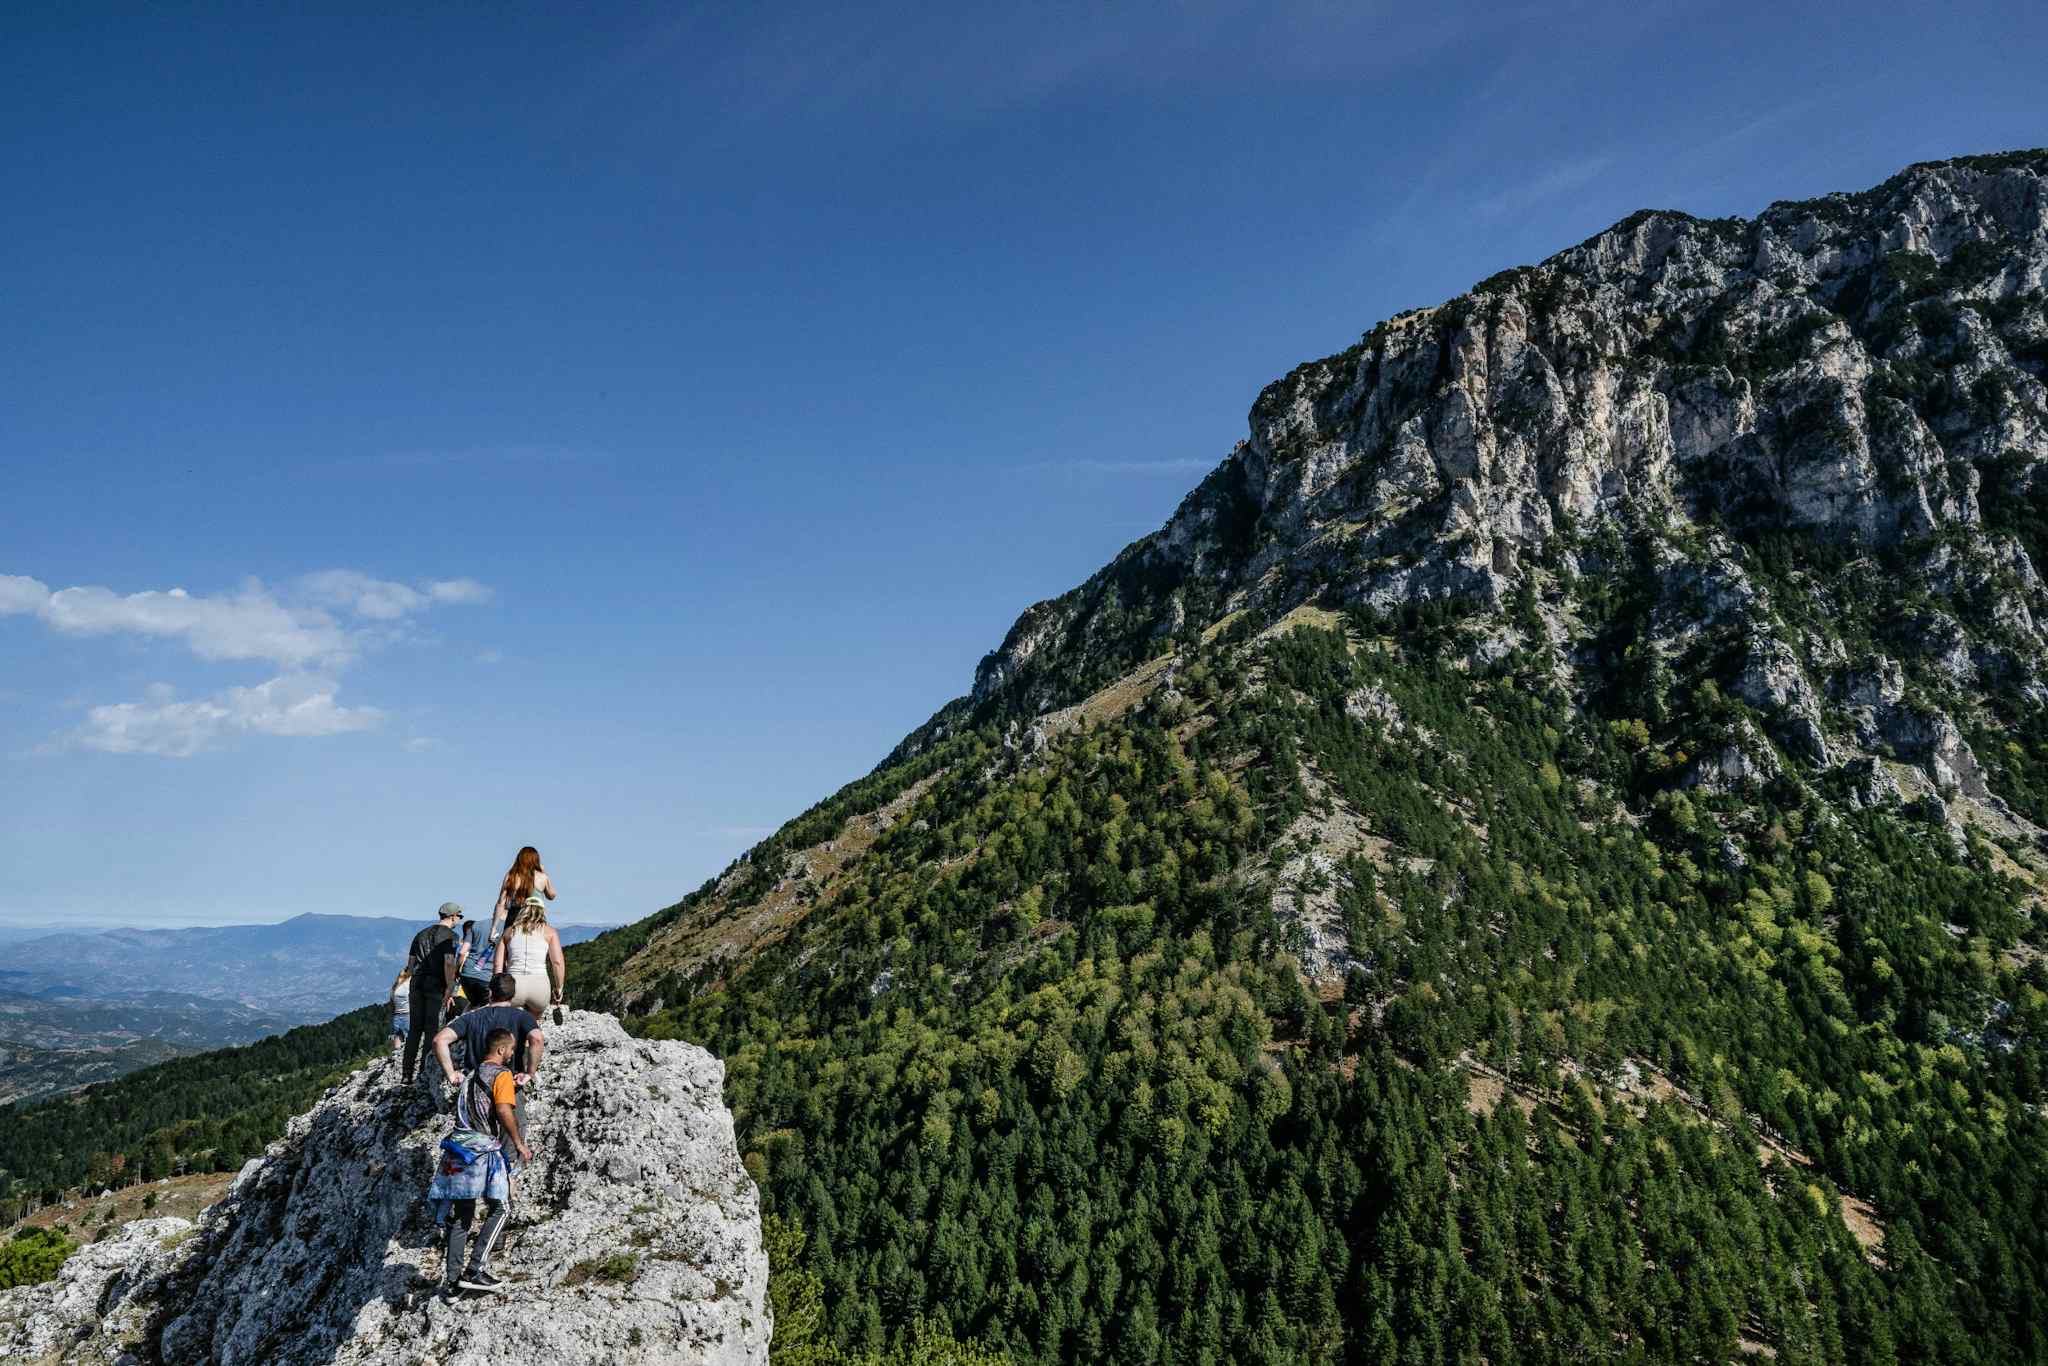 Hikers in the Tomorr Mountains of Albania with blue skies.